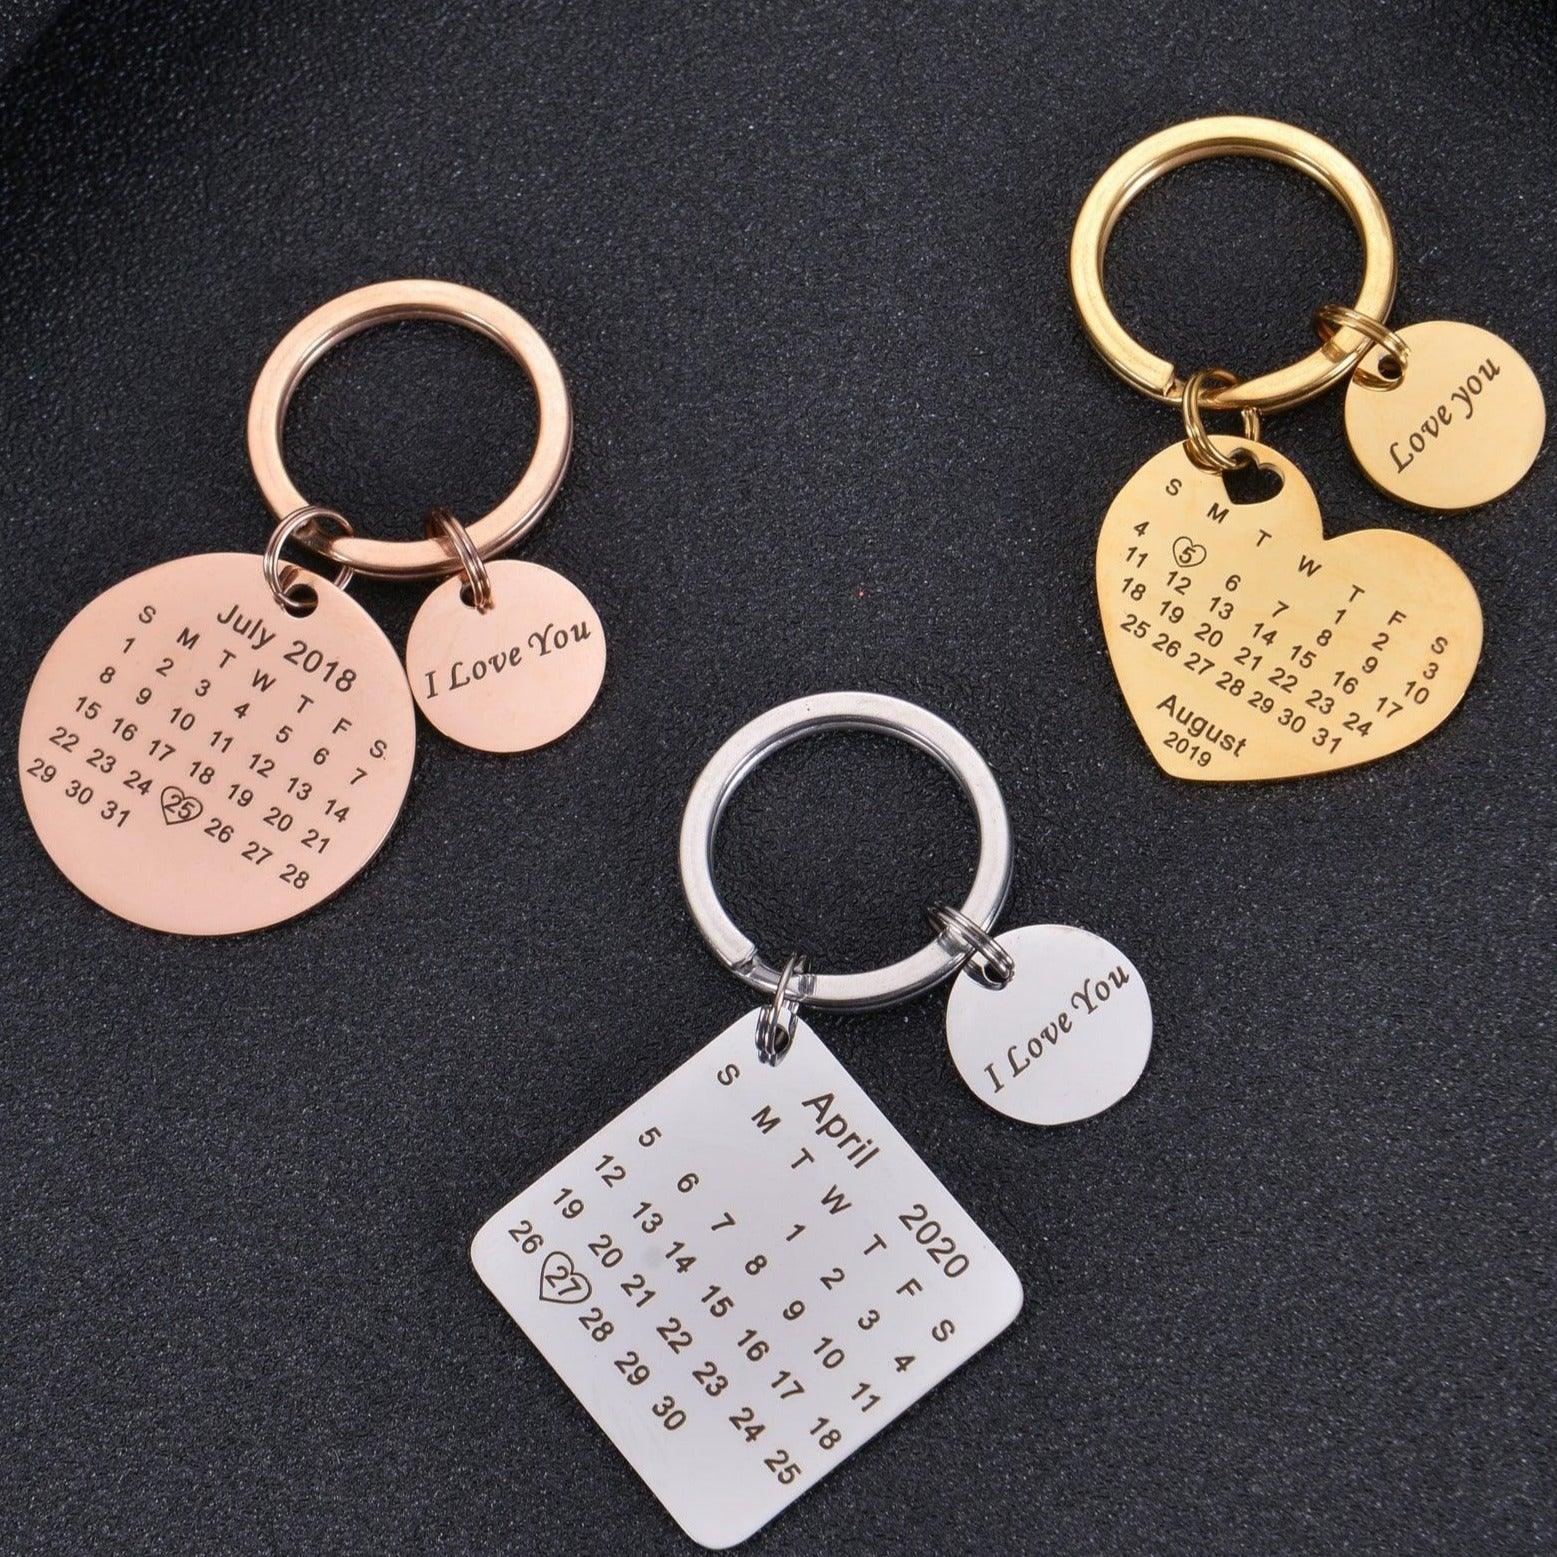 Personalized Key Chain - Custom Hand Stamped Sterling Silver Keychain with  Square Charm and Name